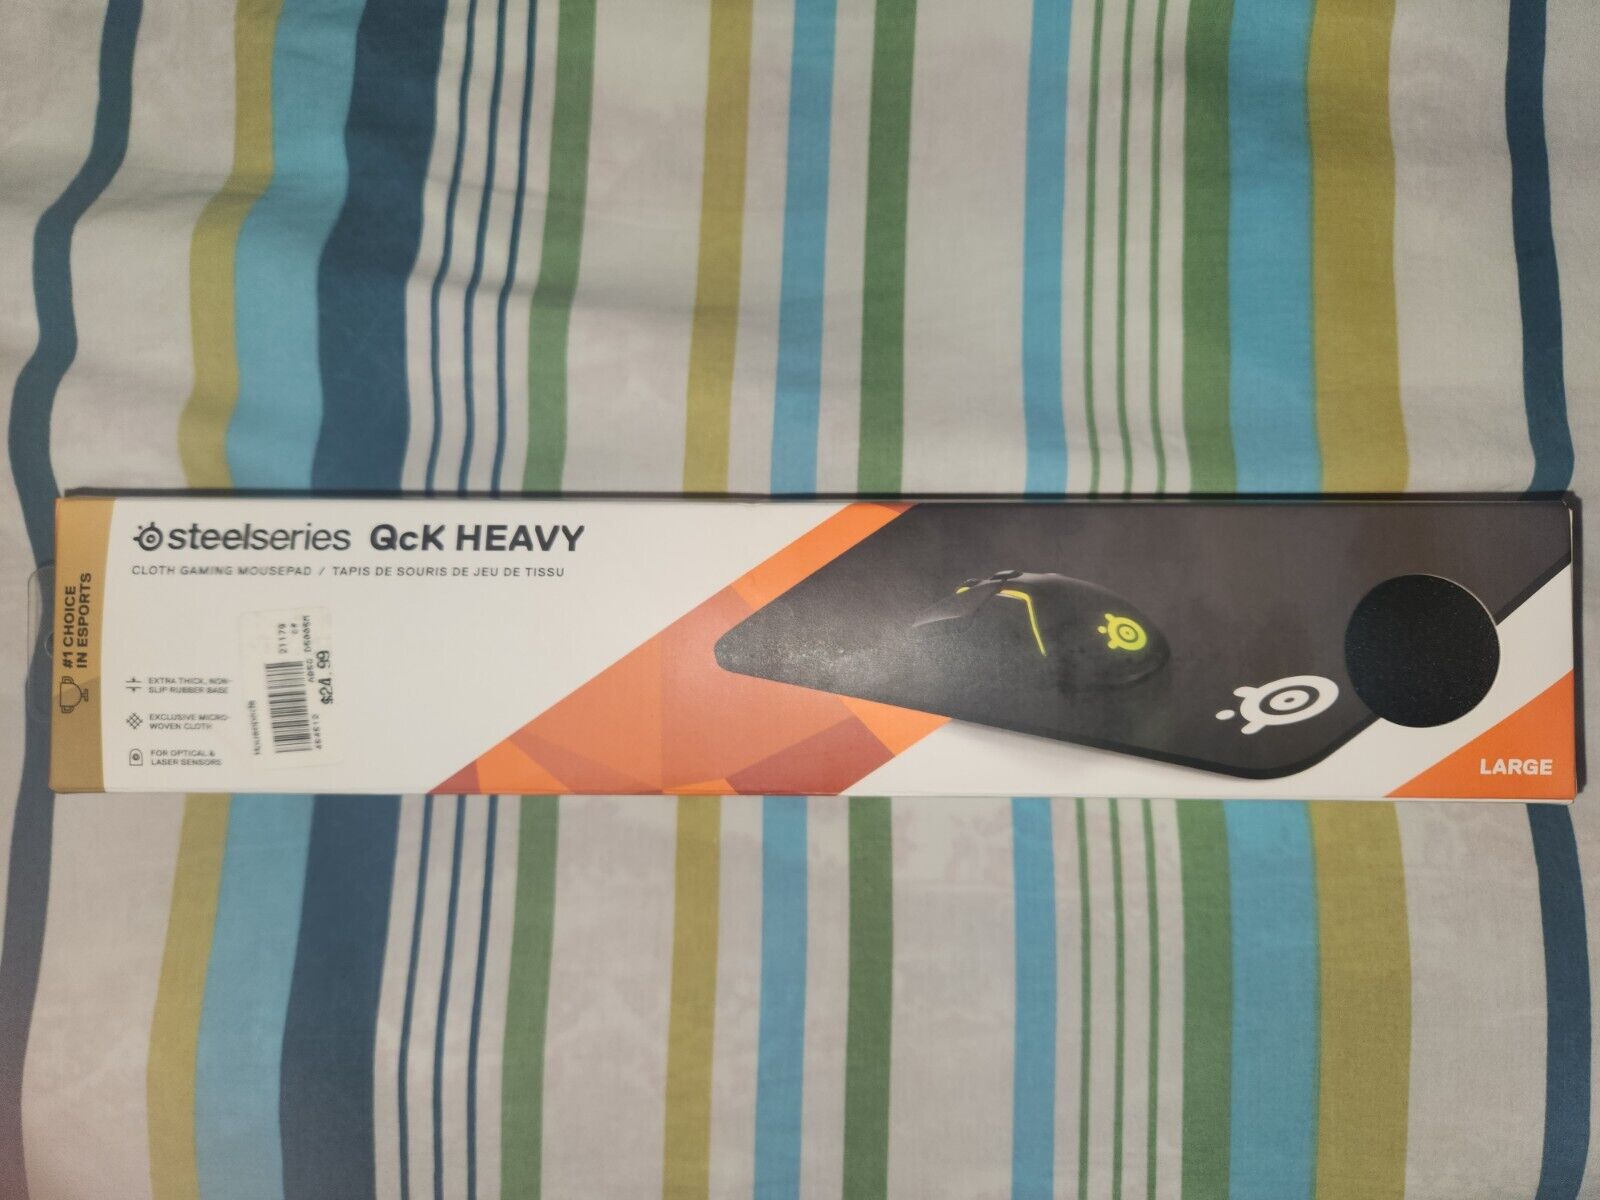 BRAND NEW SteelSeries Qck Heavy Large Mouse Pad (SEALED)